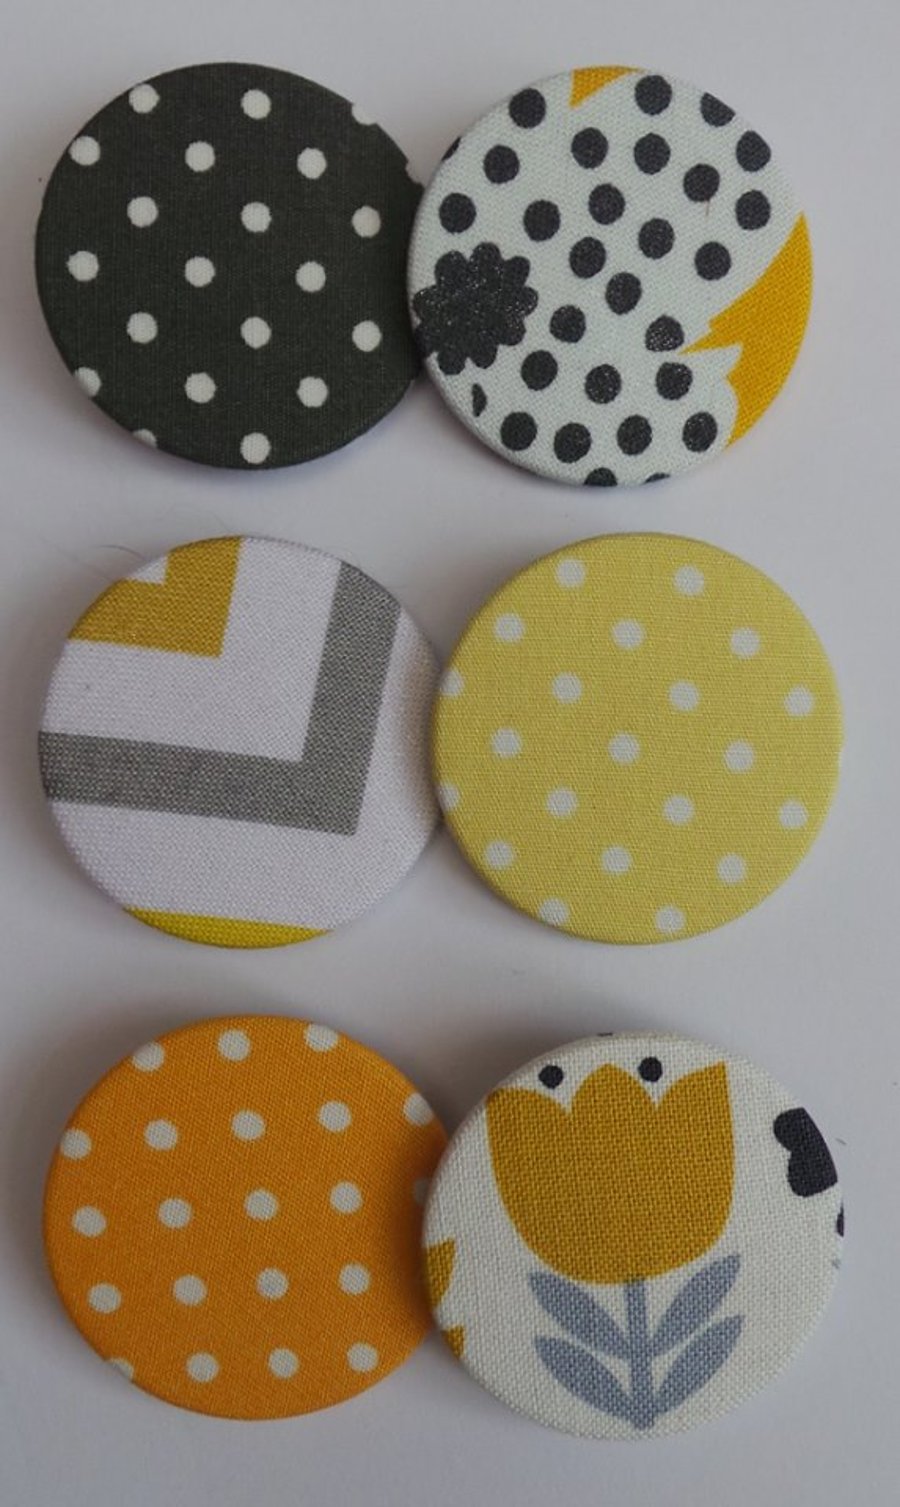 Grey & Yellow Collection Fabric Covered Badges 1 pattern 1 polka dot pack of 2